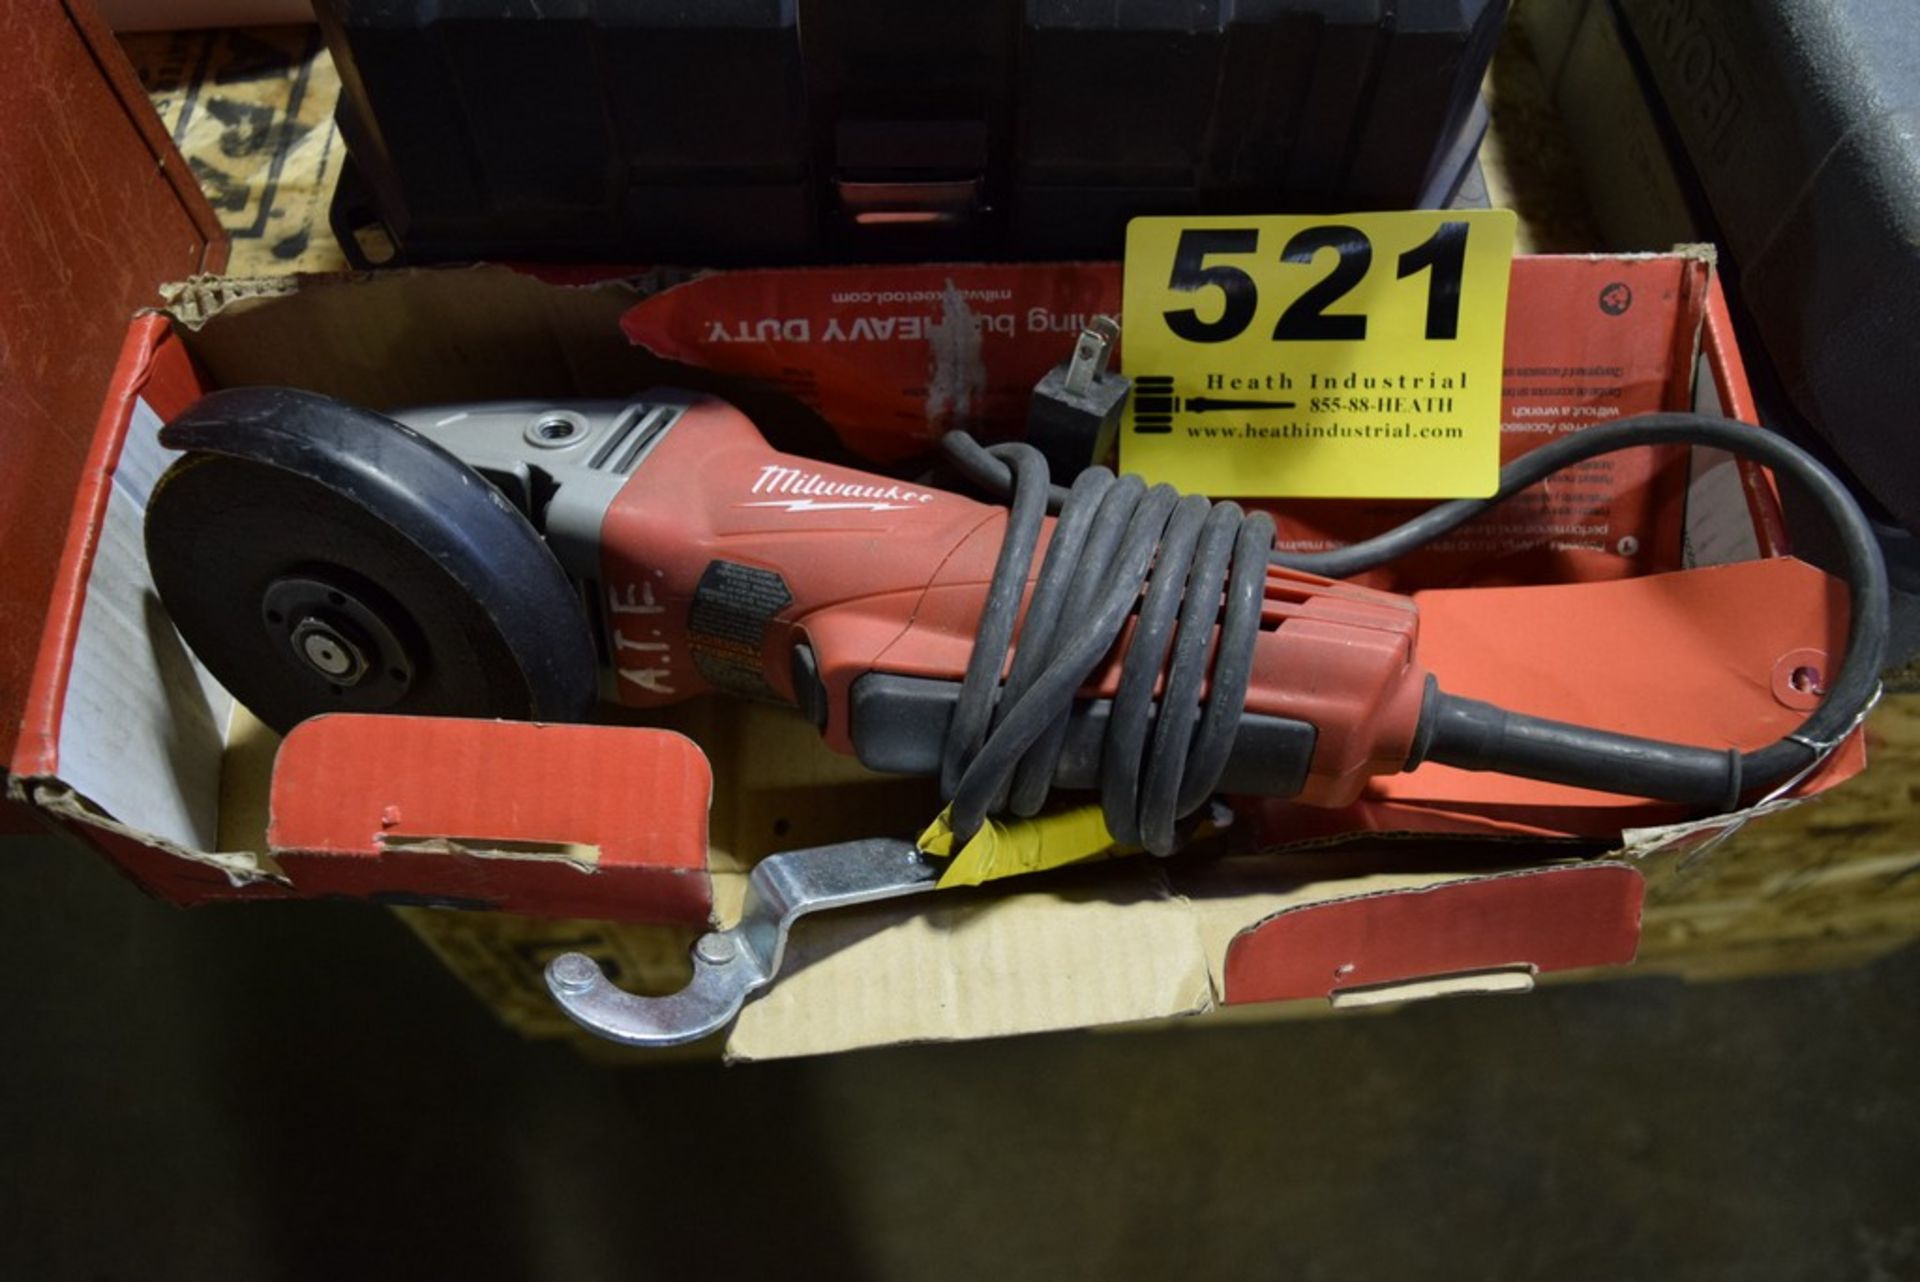 MILWAUKEE MODEL 6147-31 4-1/2" RIGHT ANGLE GRINDER